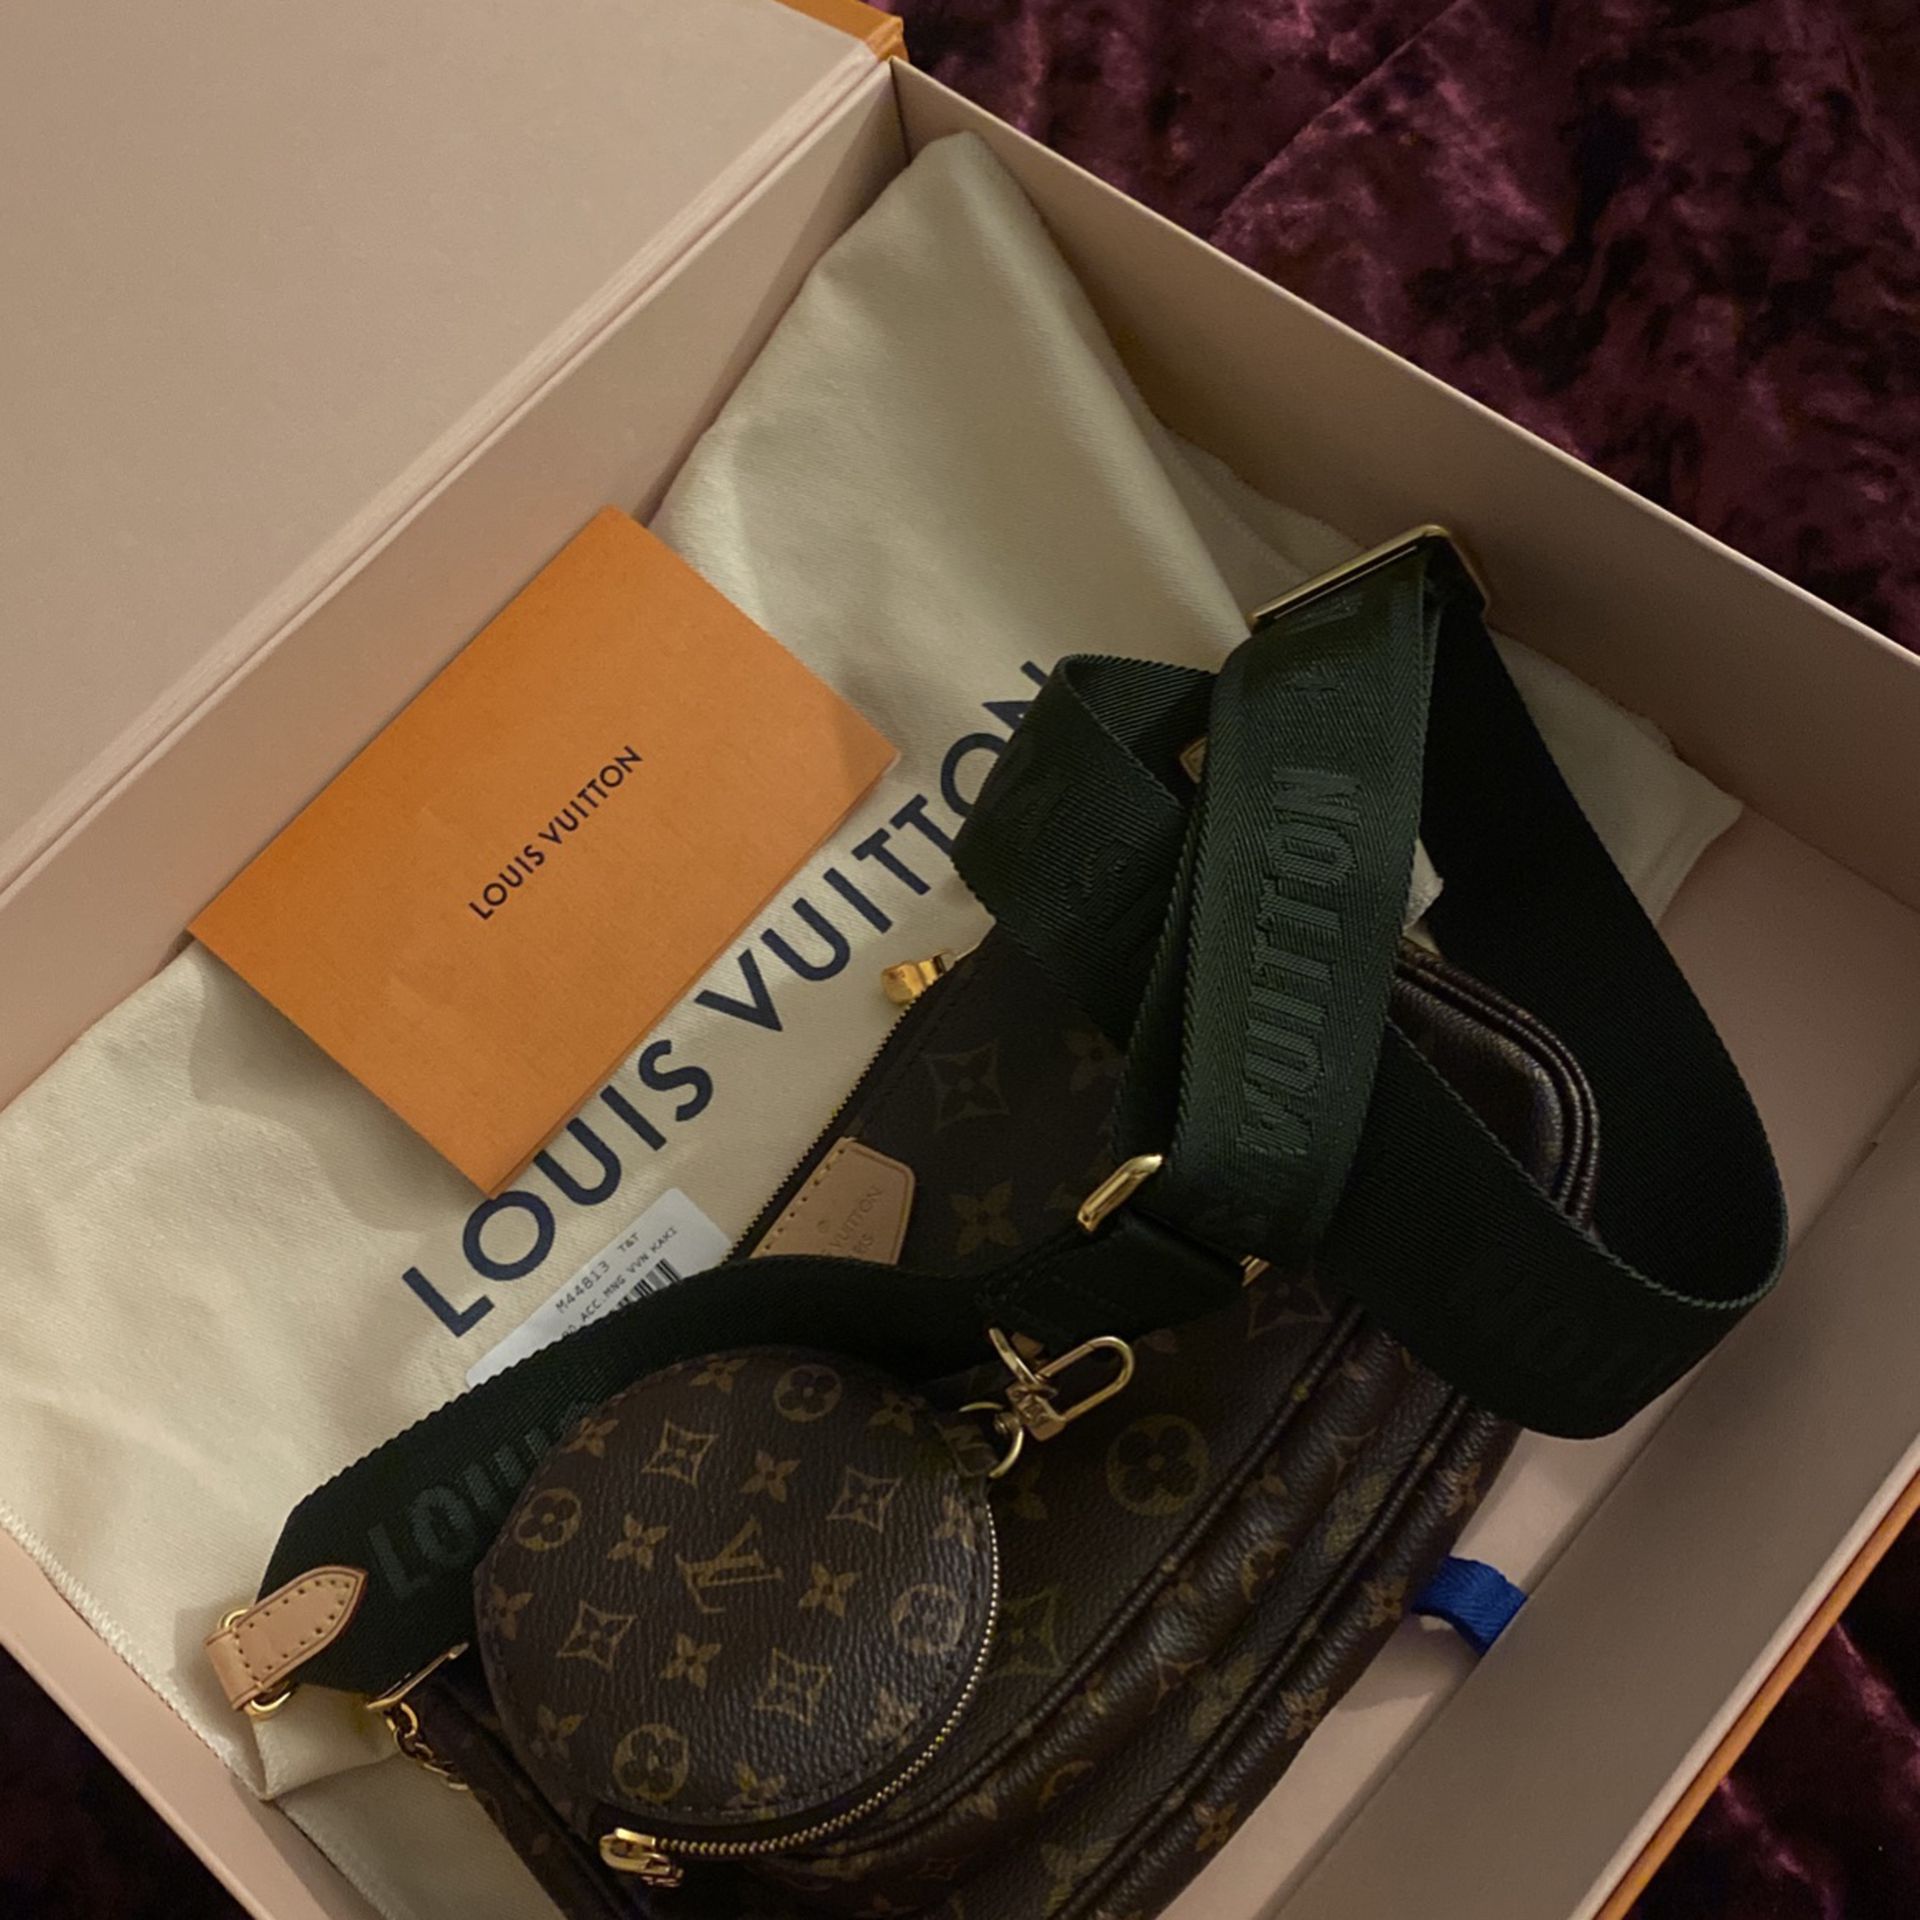 New Authentic Louis Vuitton Leather Vachetta Pochette Accessoires Strap  Only for Sale in Fremont, CA - OfferUp